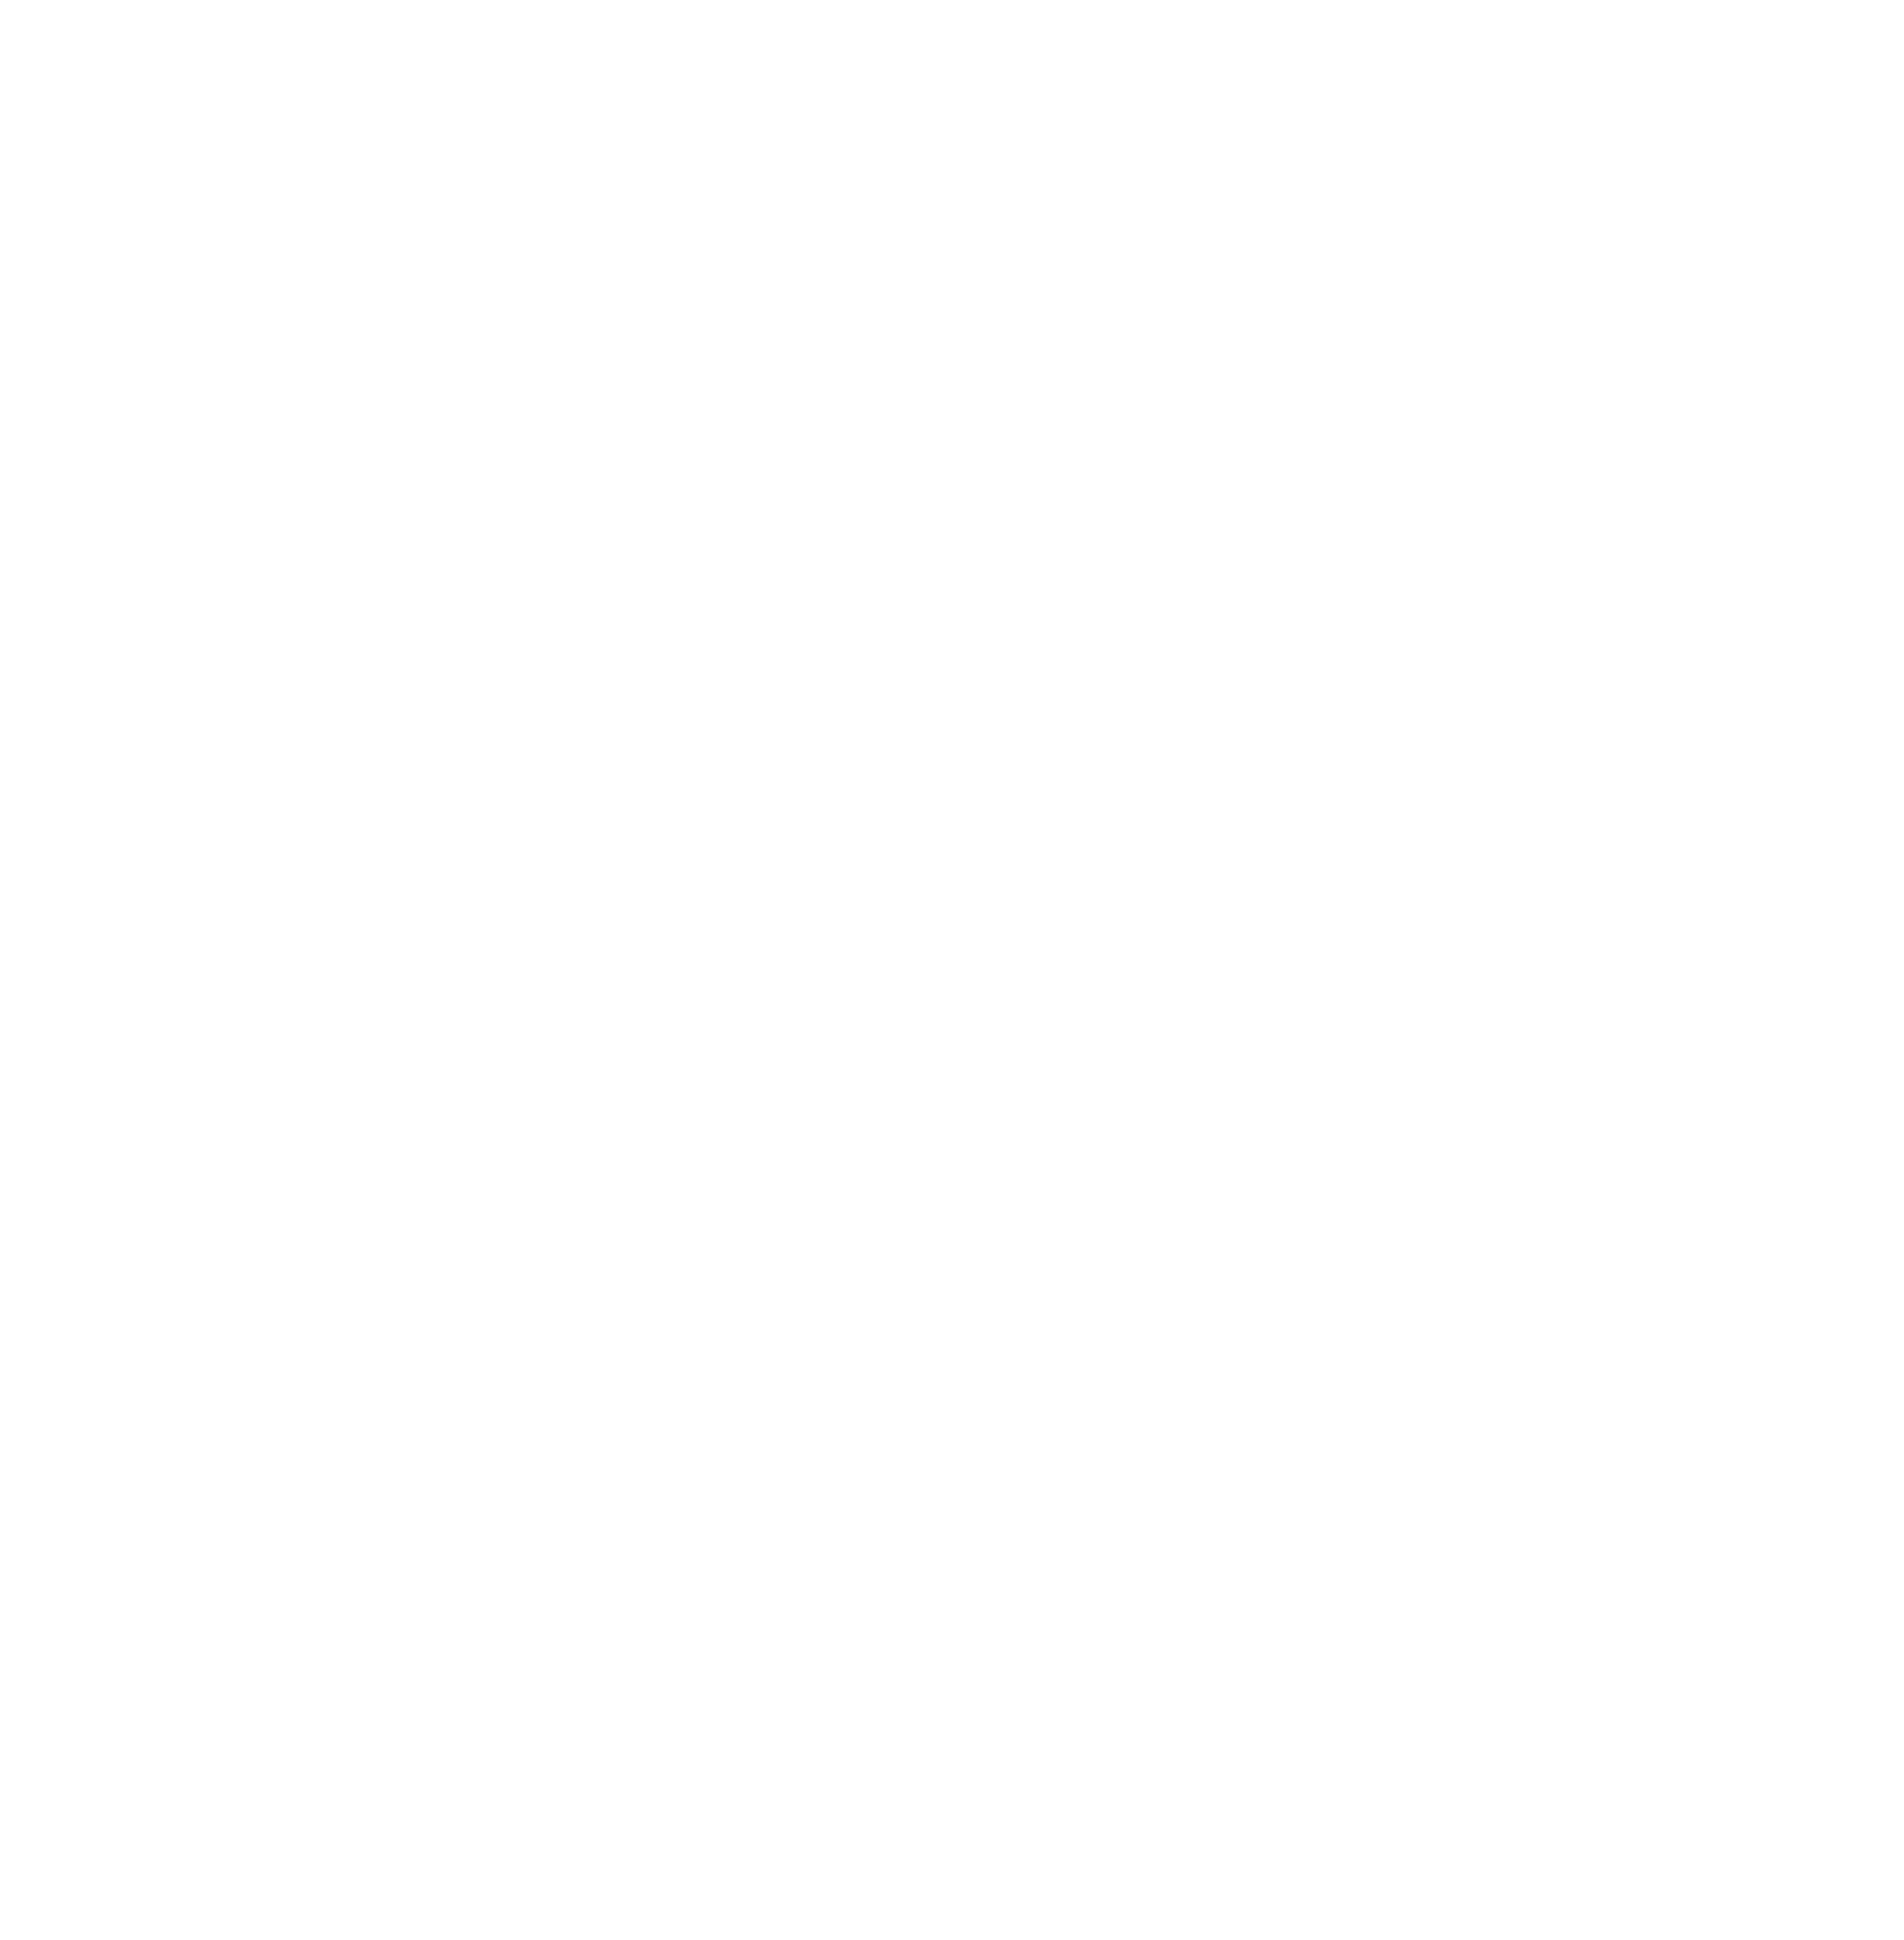 EXPLORE THE OUTDOORS